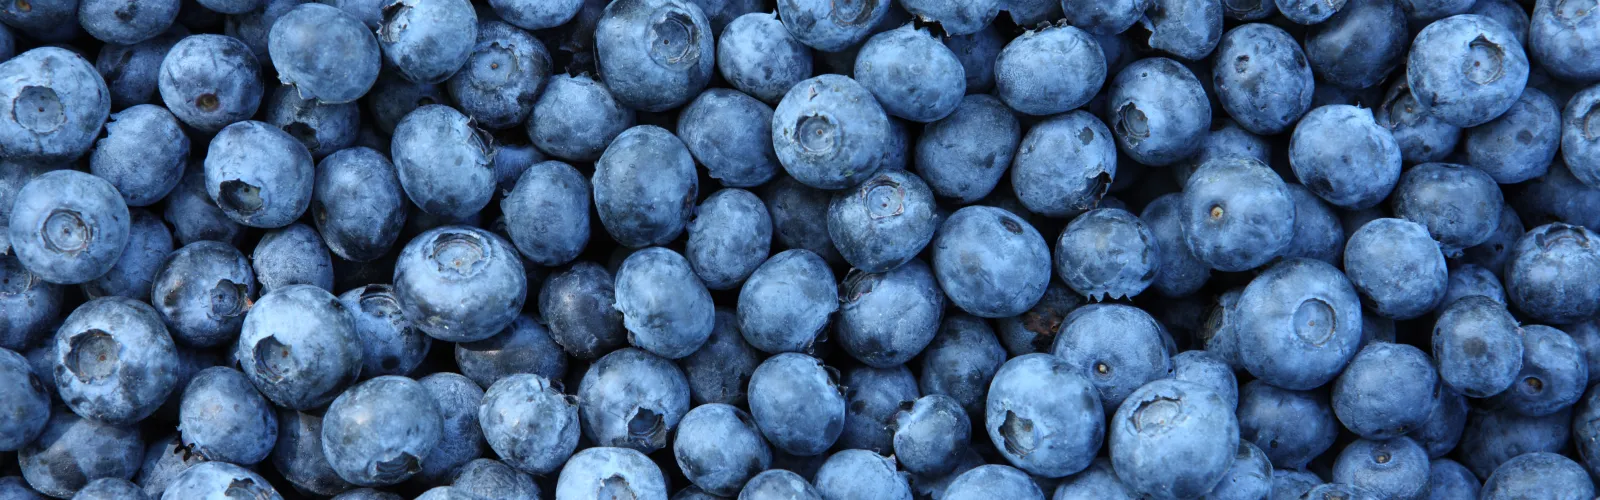 a large pile of blueberries